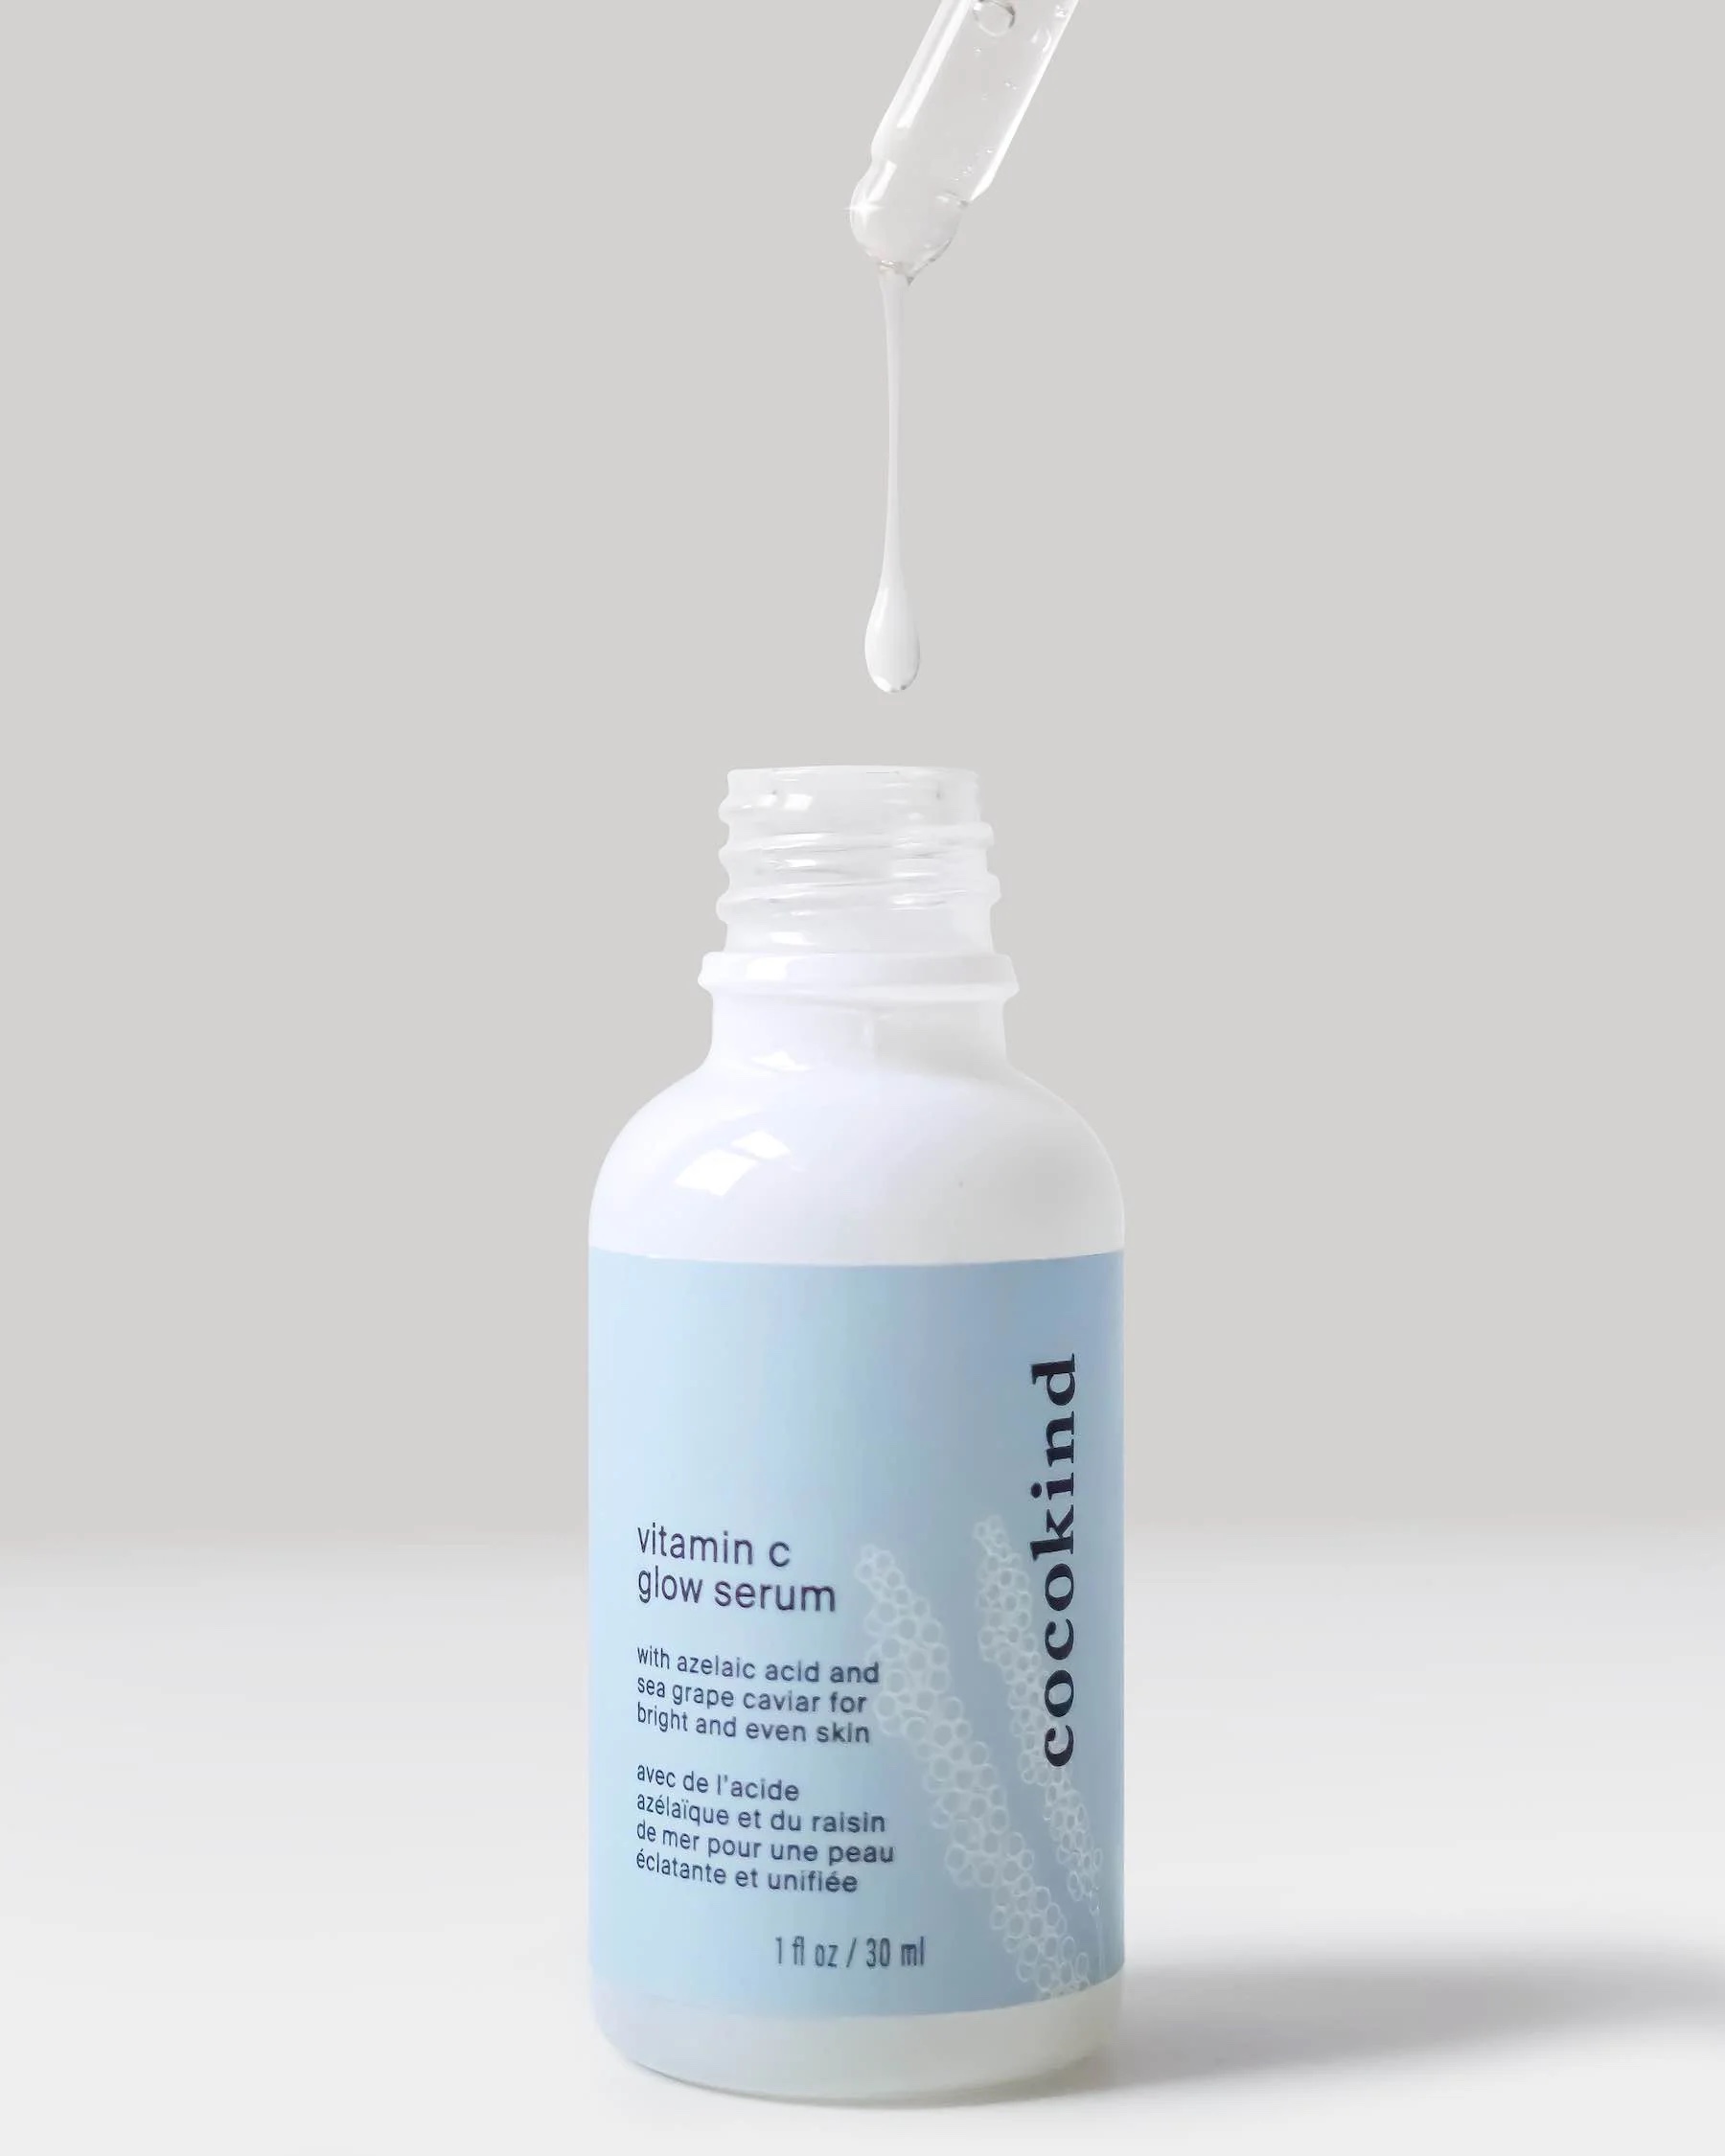 A dropper of serum falls into the product's bottle.